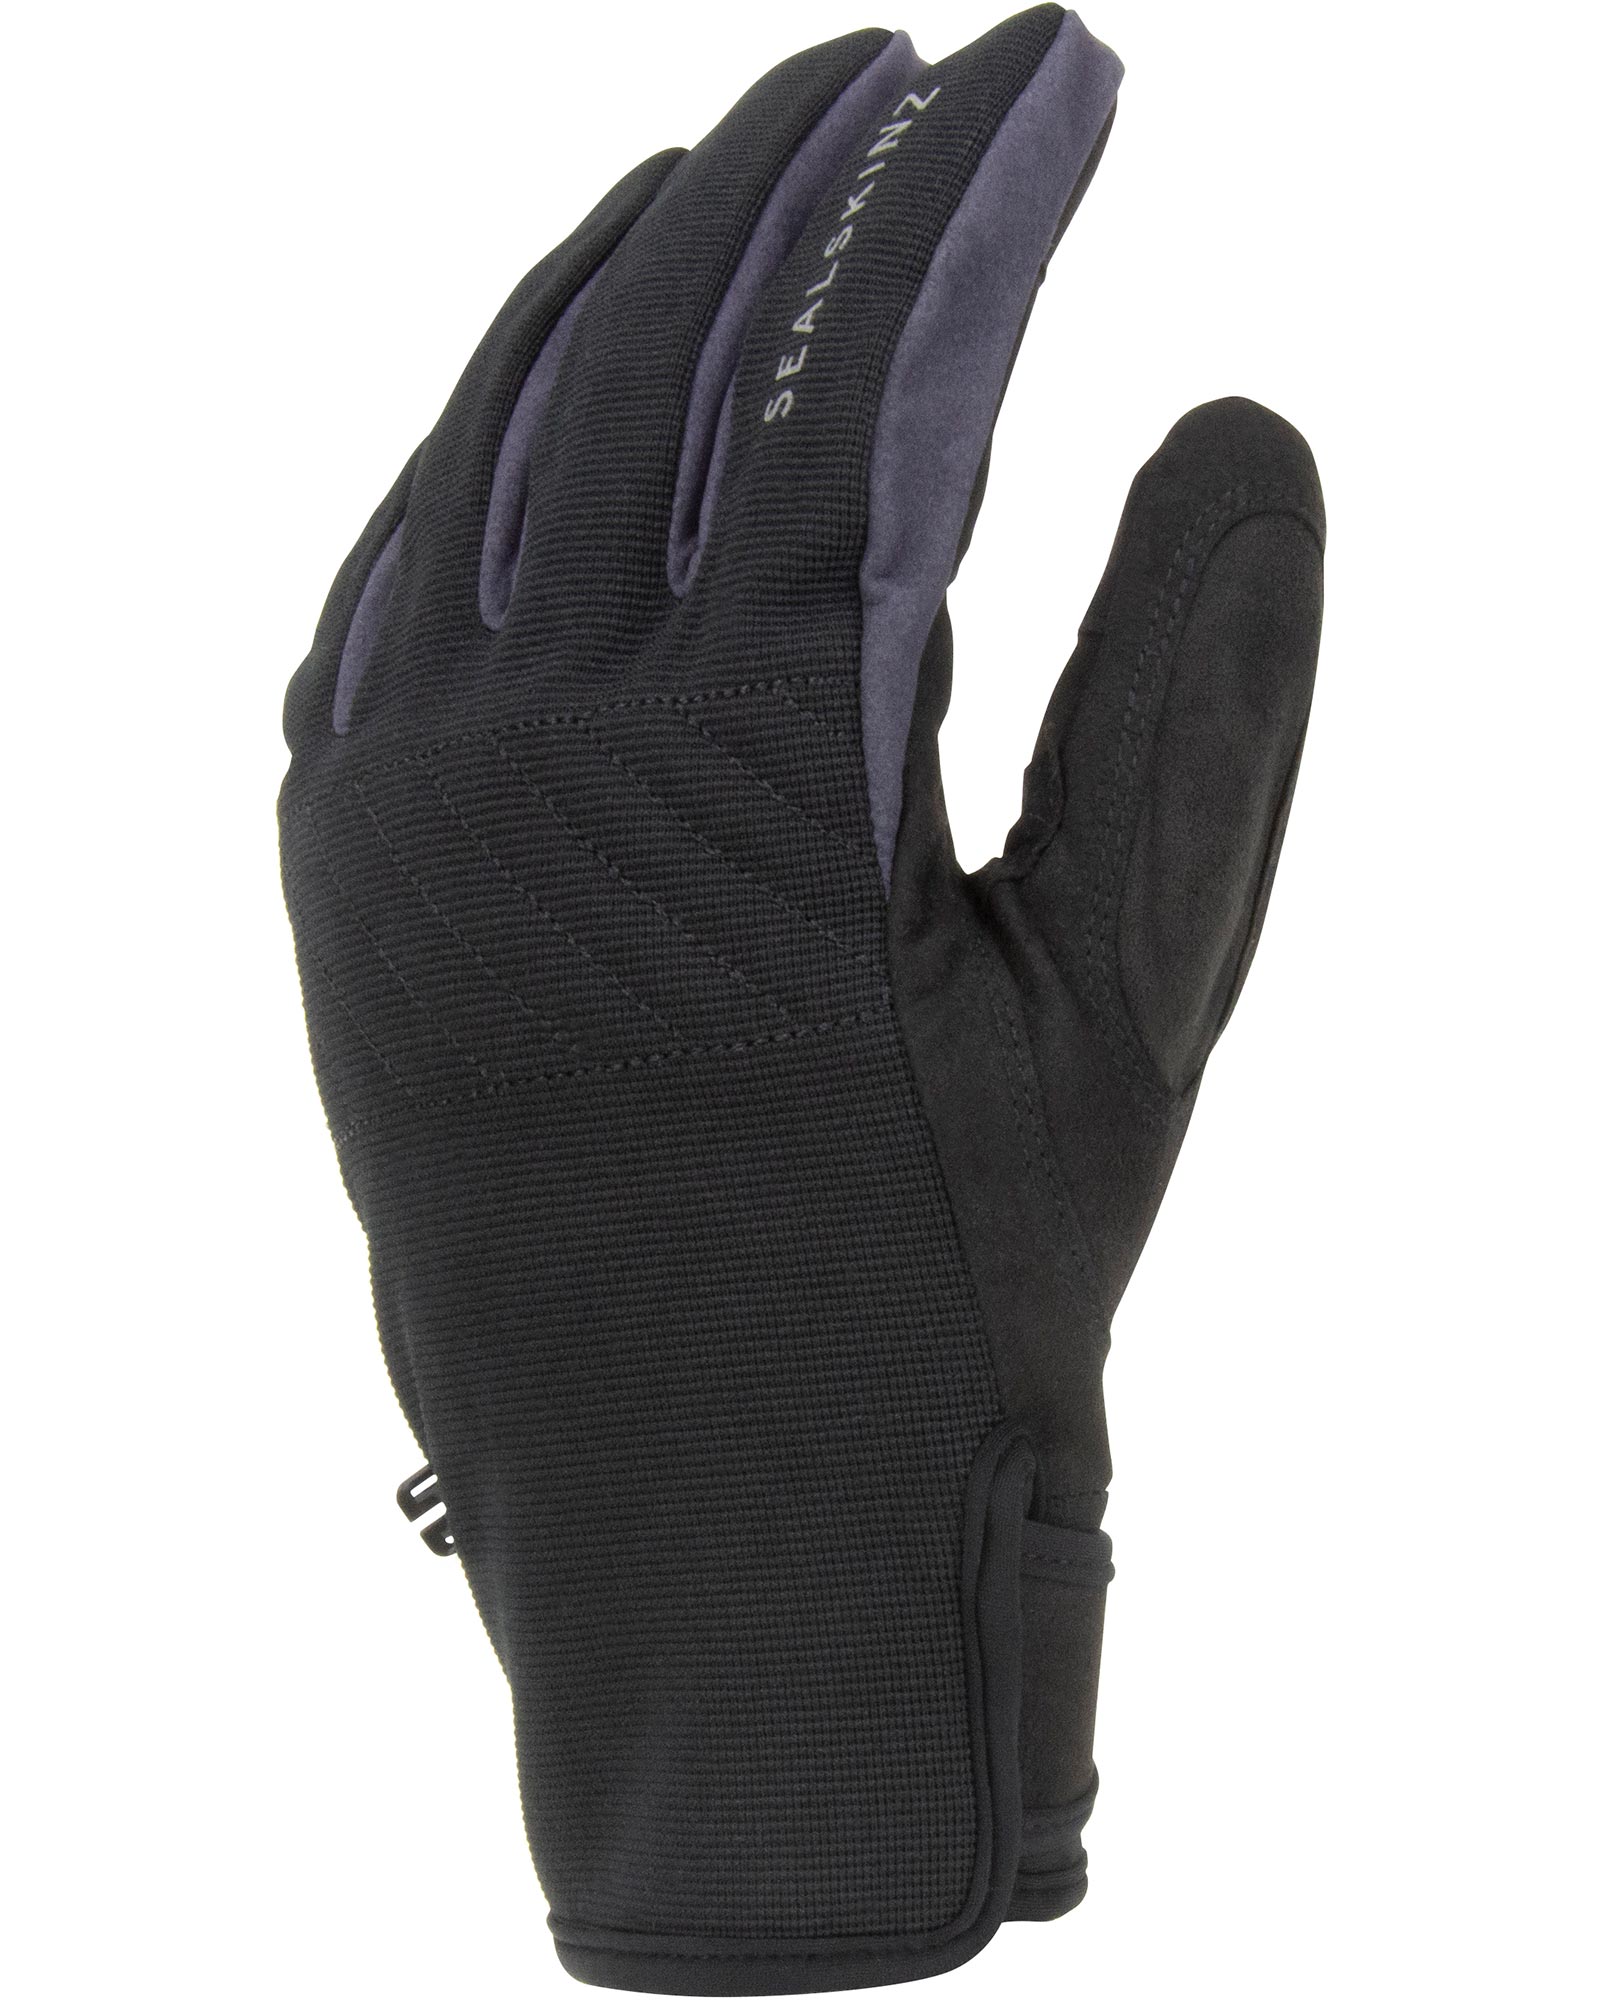 SealSkinz Fusion Control All Weather Gloves - black XL